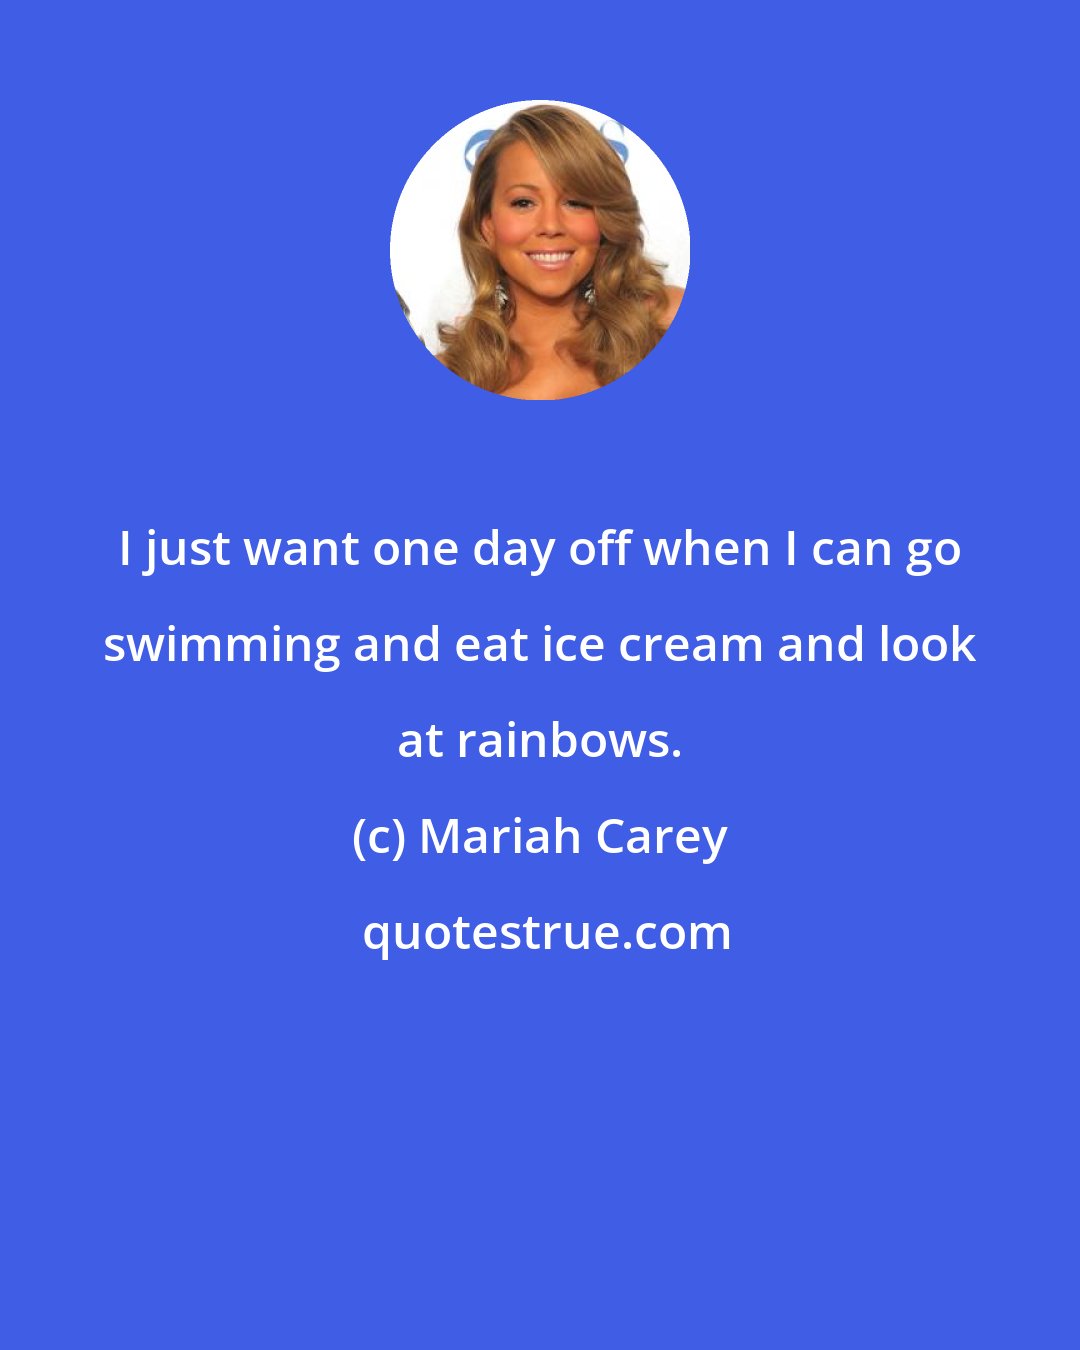 Mariah Carey: I just want one day off when I can go swimming and eat ice cream and look at rainbows.